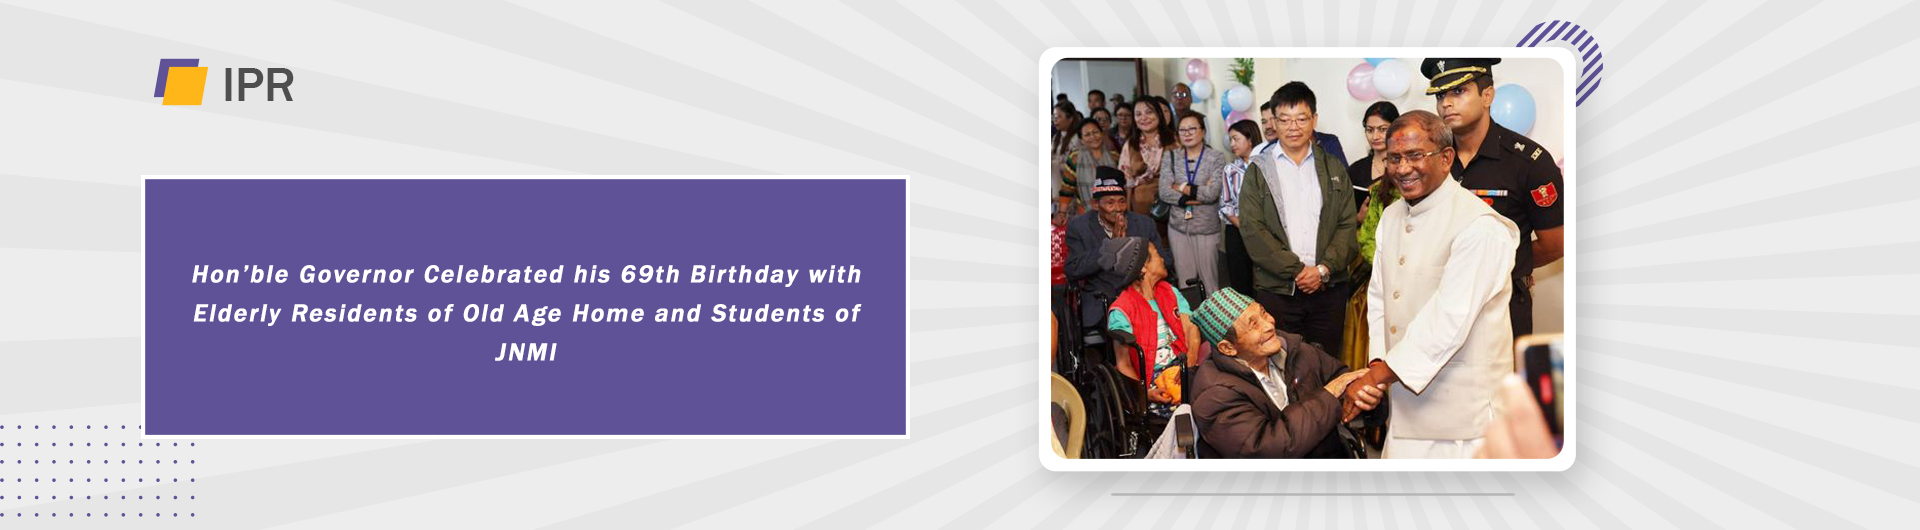 Hon’ble Governor Celebrated his 69th Birthday with Elderly Residents of Old Age Home and Students of JNMI